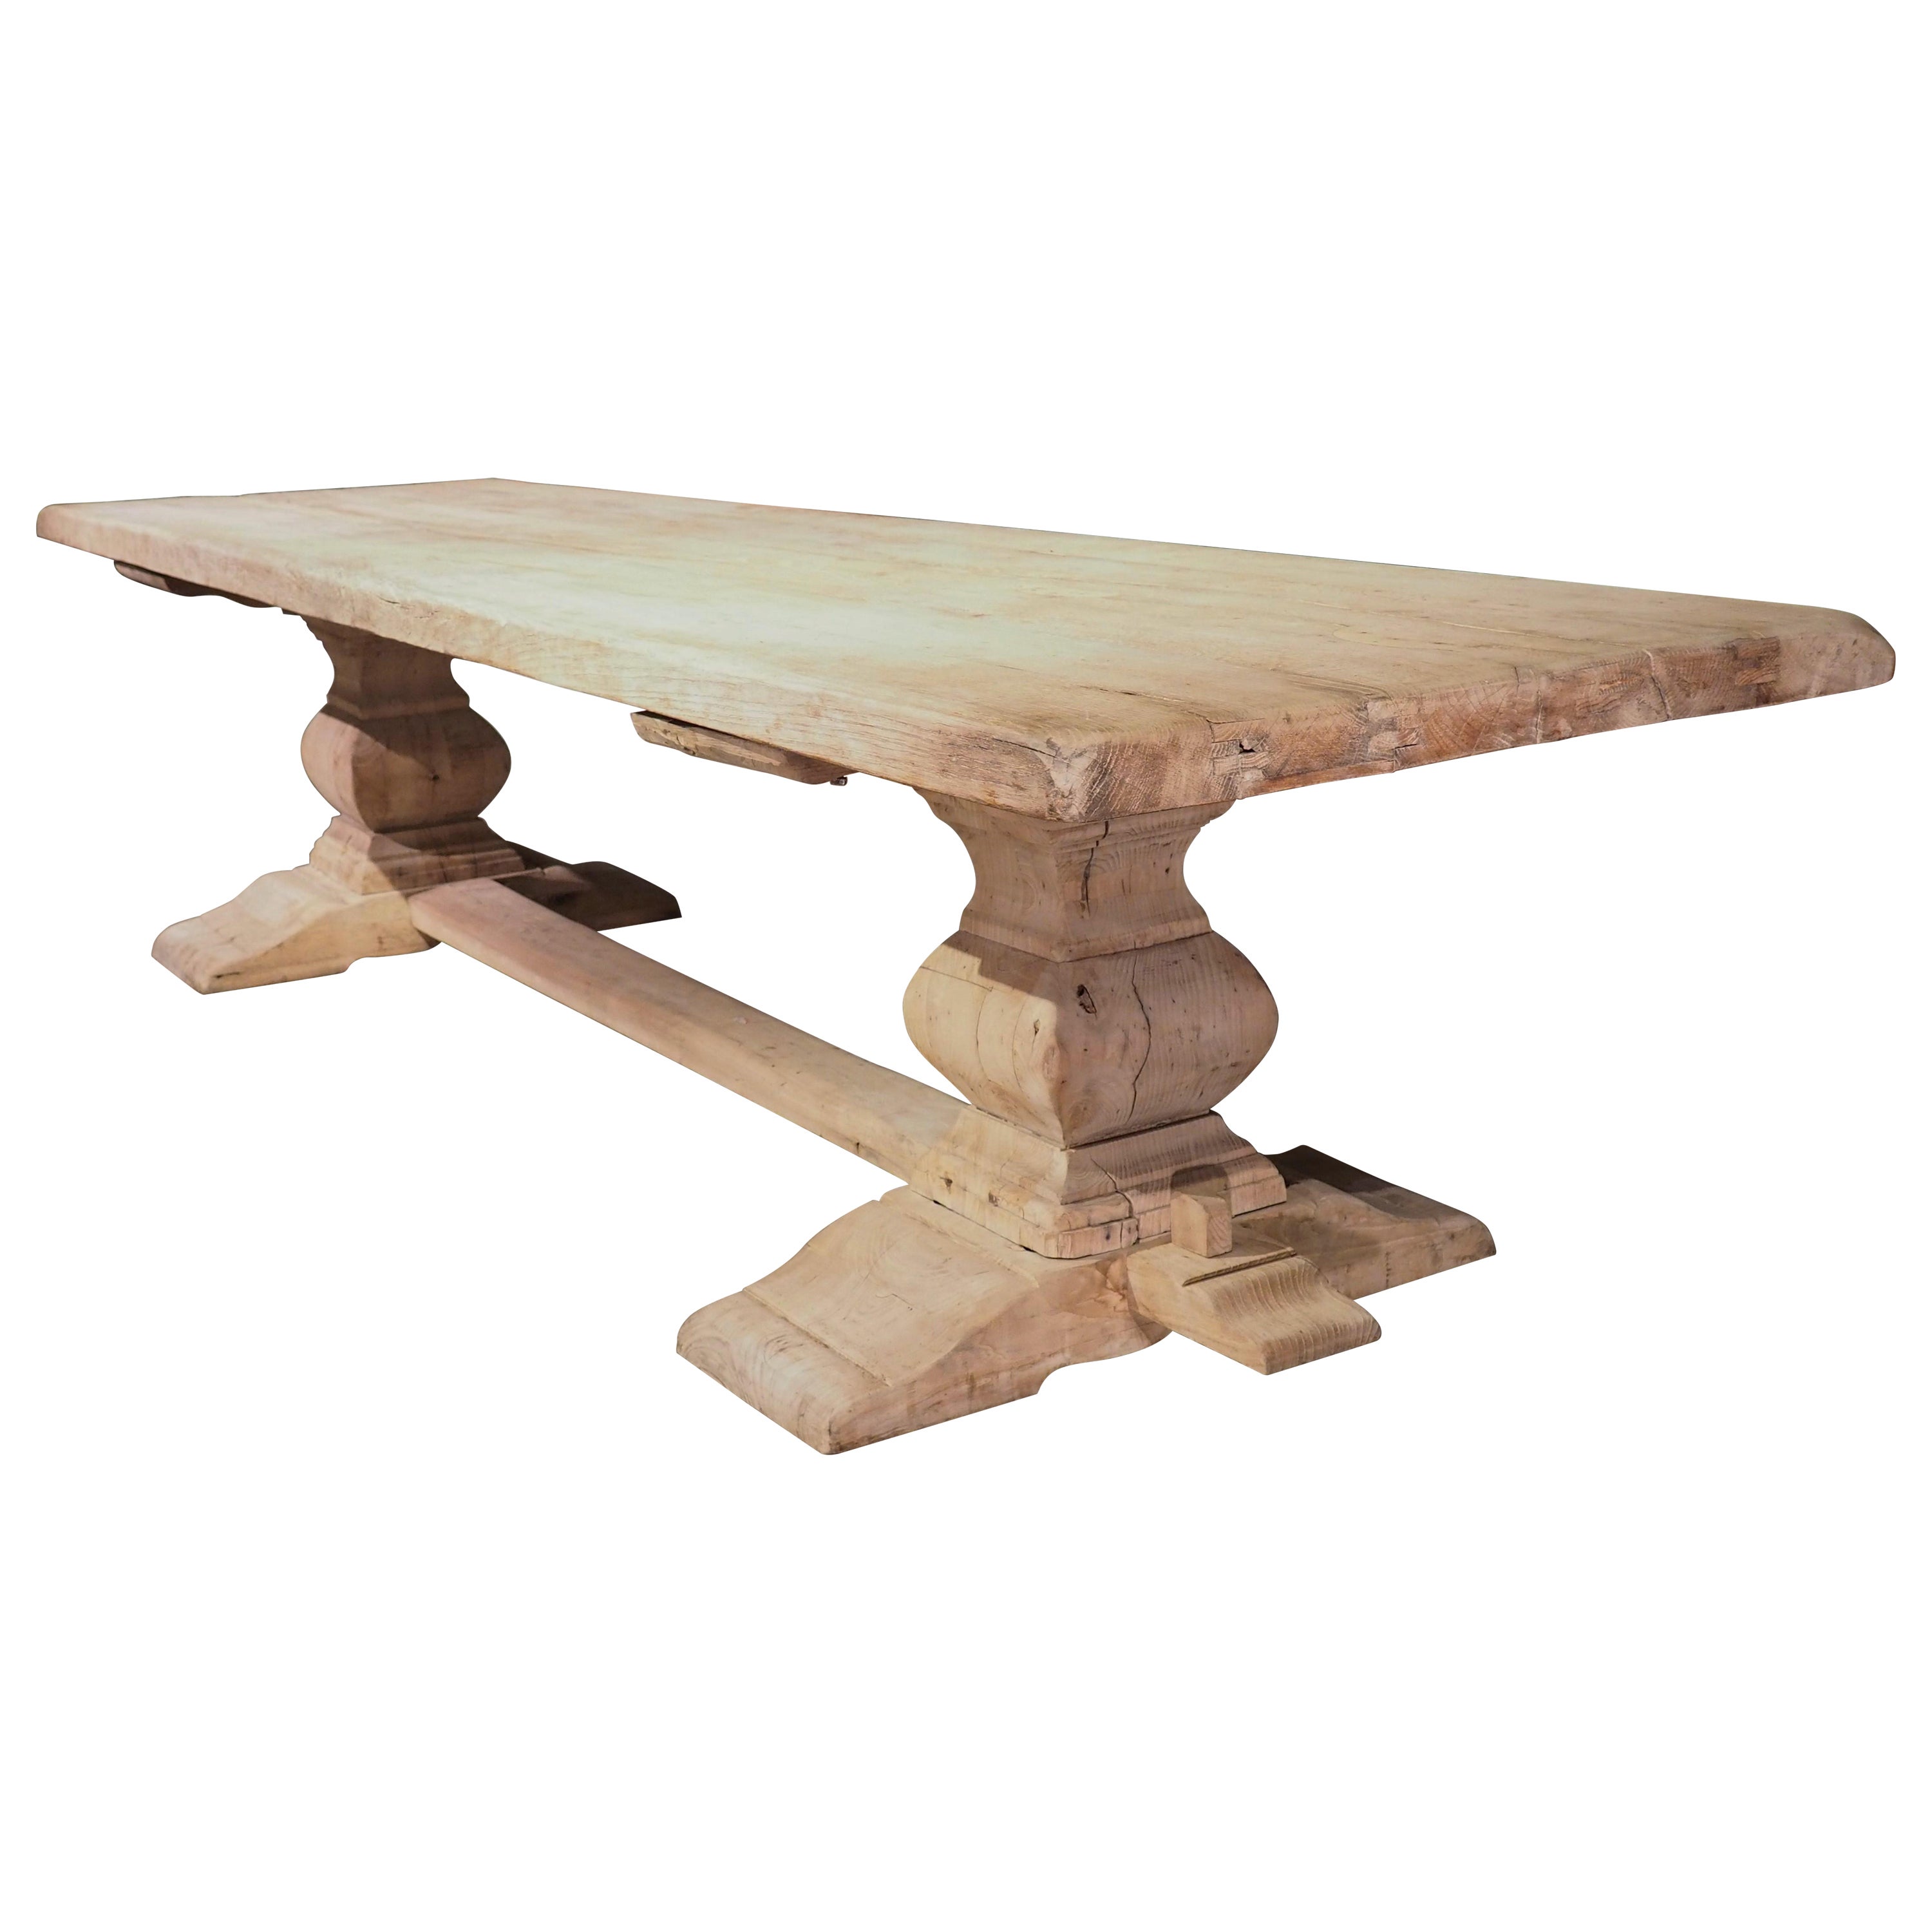 This thick, carved oak monastery table was produced in France, circa 1890. Originally built using large pieces of French oak, and given a darker, more traditional stain. At some point in its history, the table was stripped and bleached, allowing it